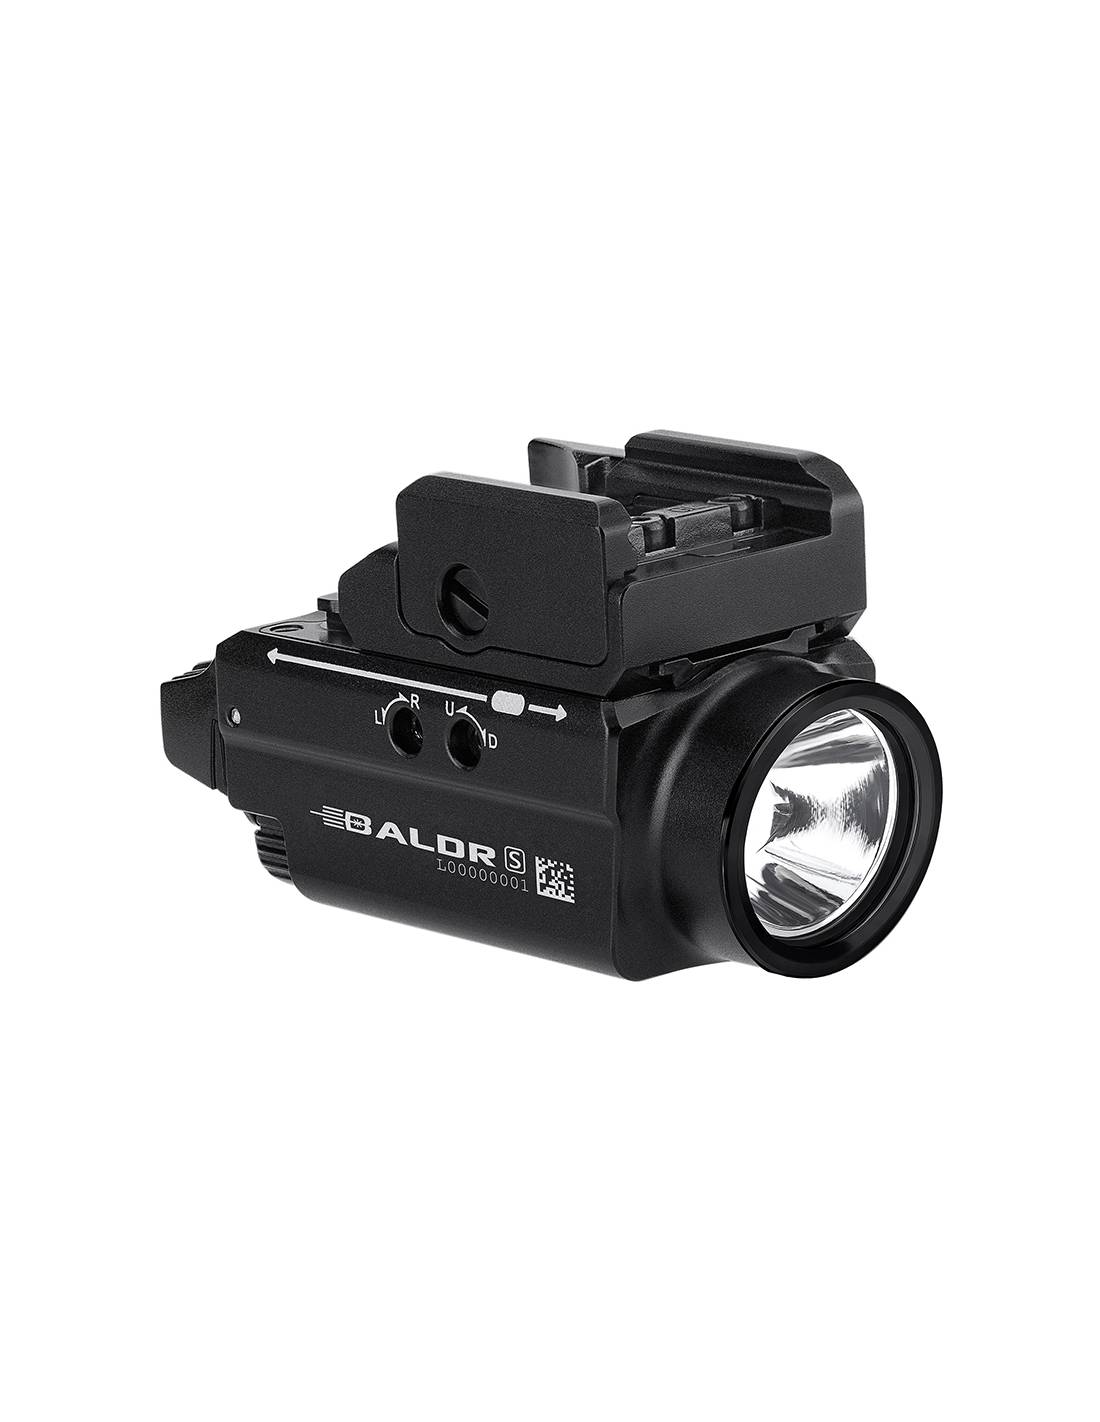 Flashlight for Weapon with Laser Baldr S 800 lum.